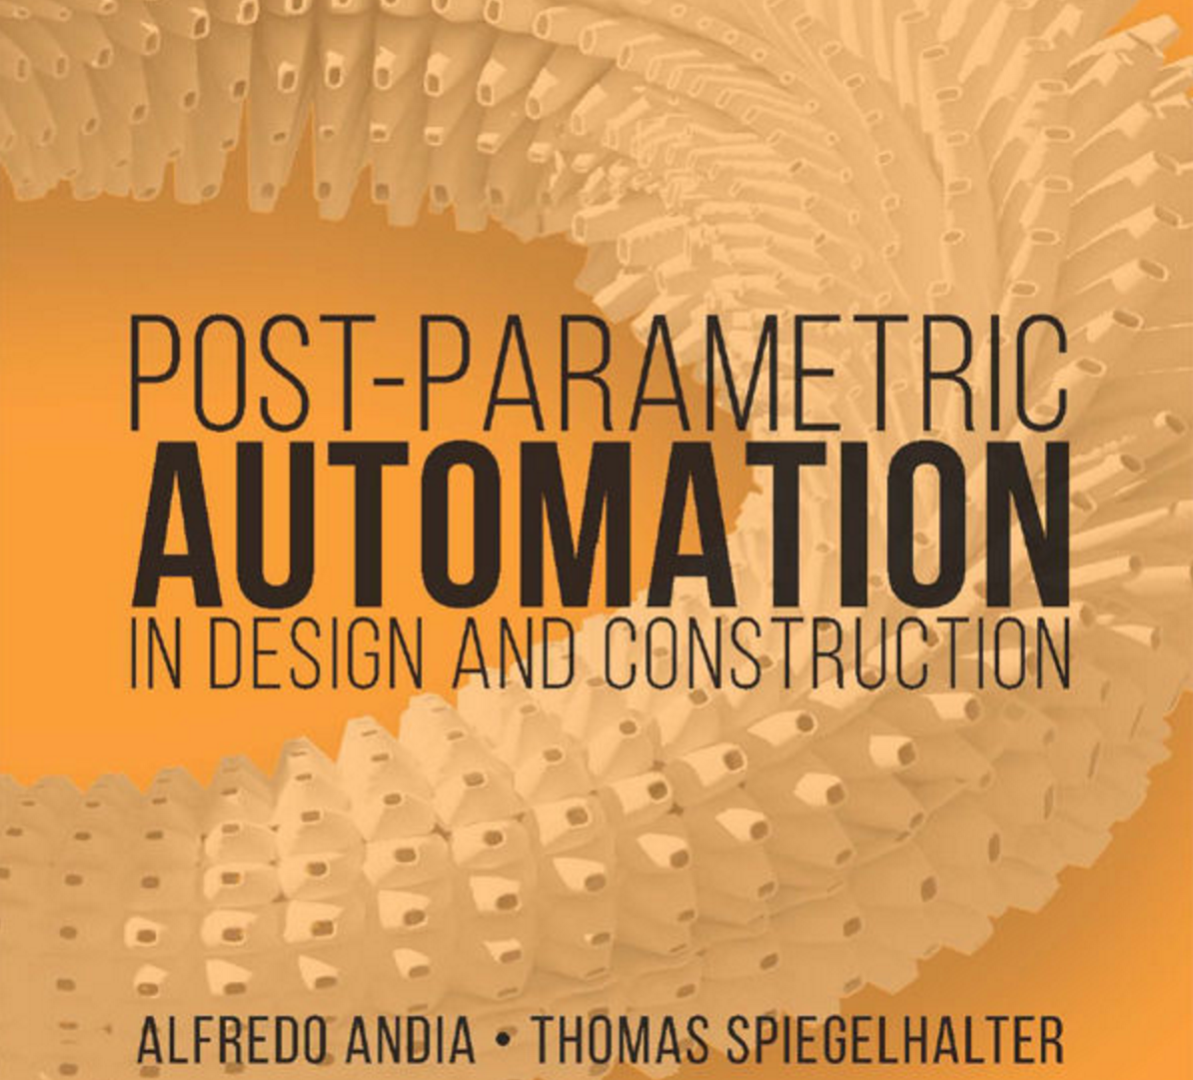 Post-parametric Automation in Design and Construction